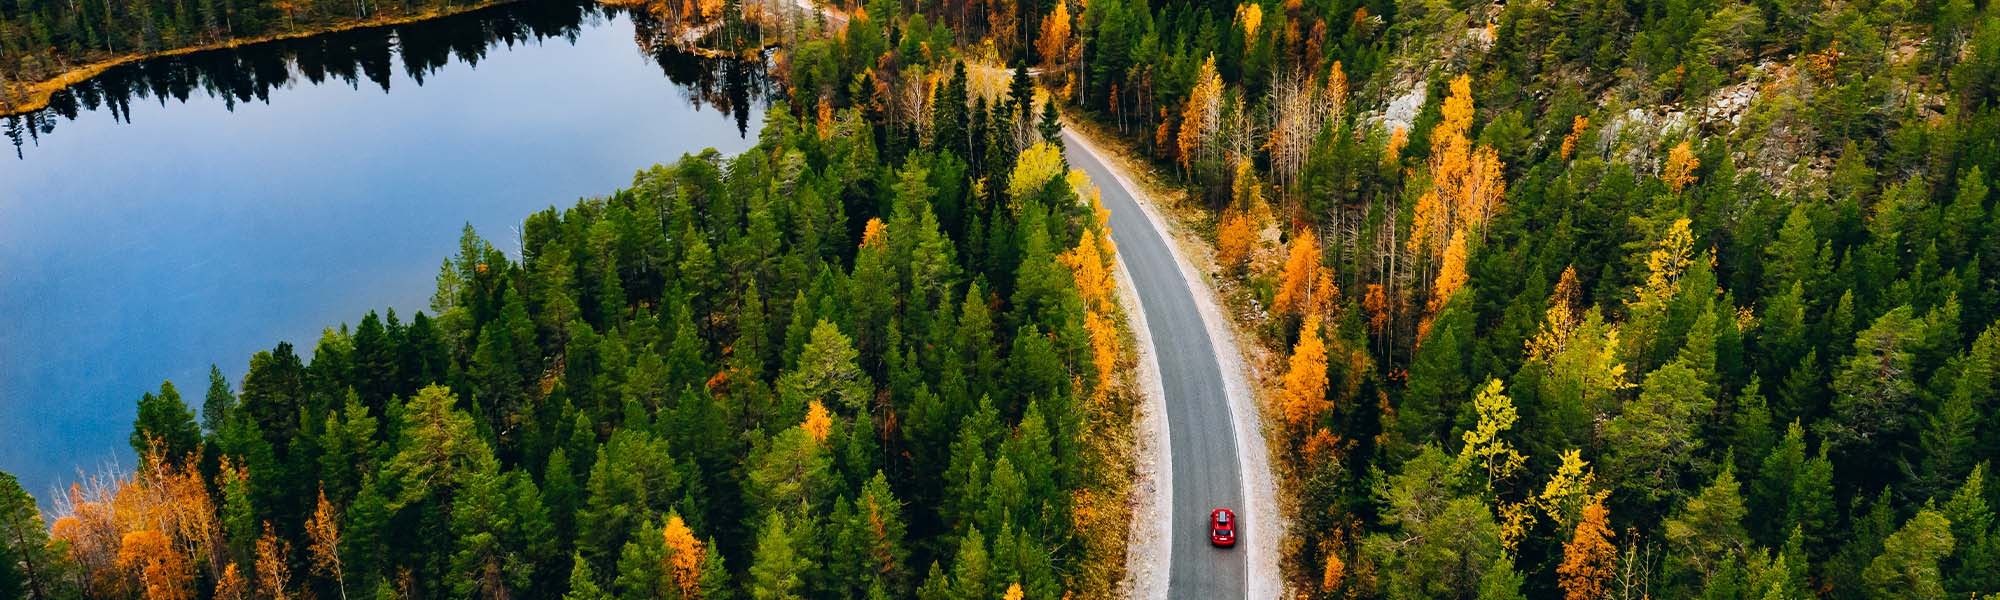 How routing algorithms prioritize safety over speed in rural Finland